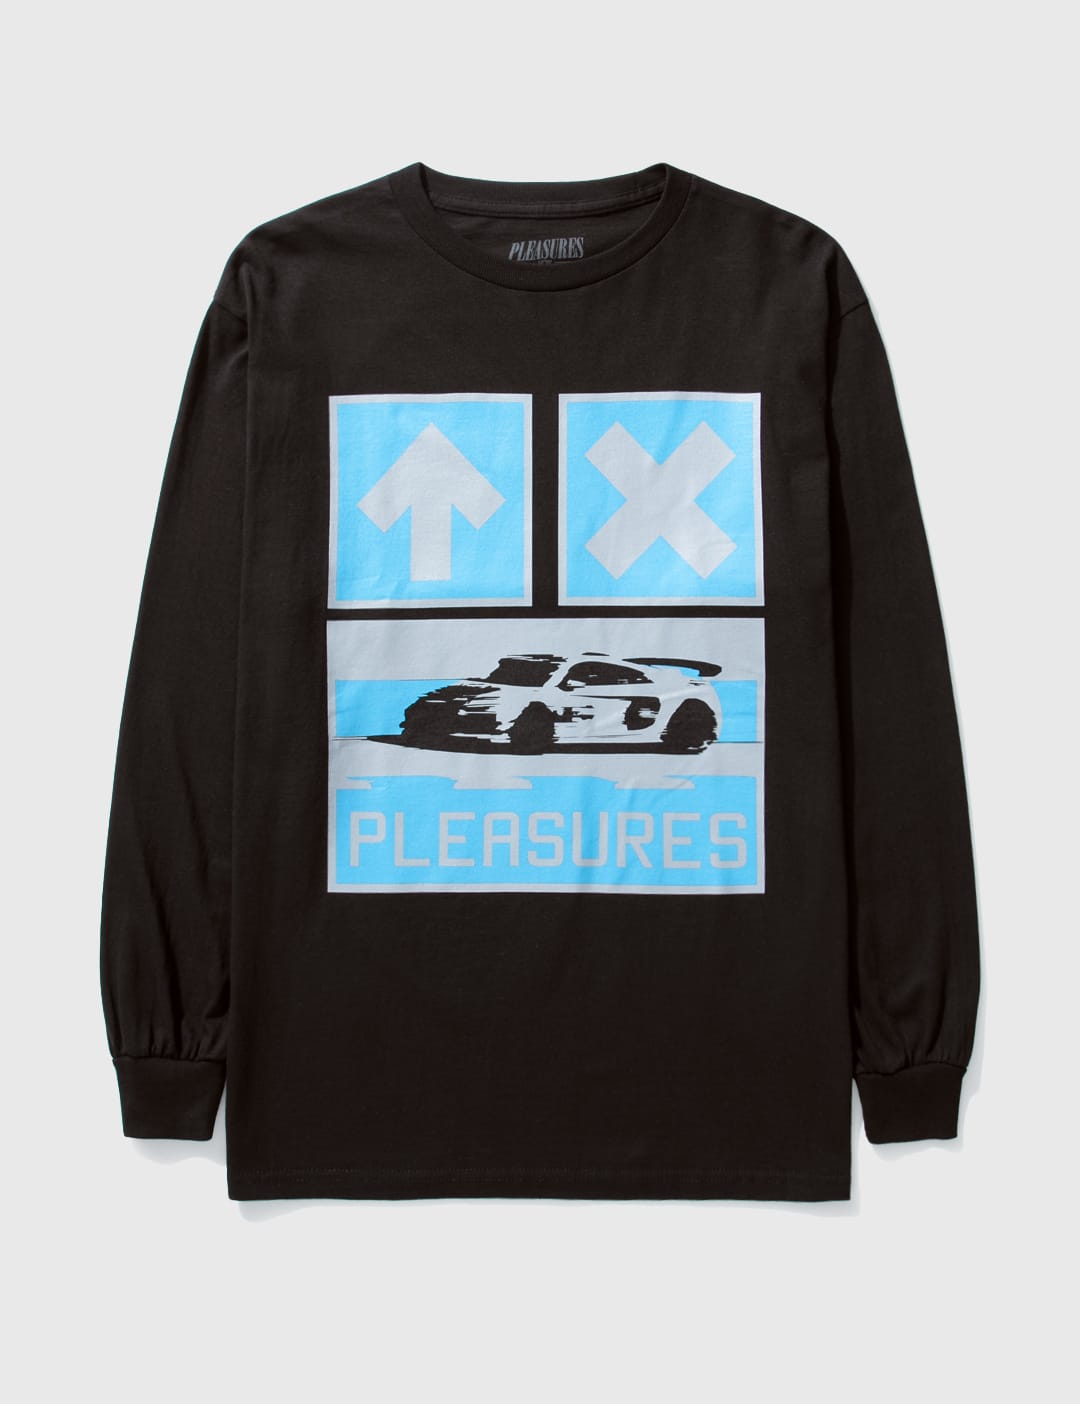 Pleasures   Drive Long Sleeve T shirt   HBX   Globally Curated